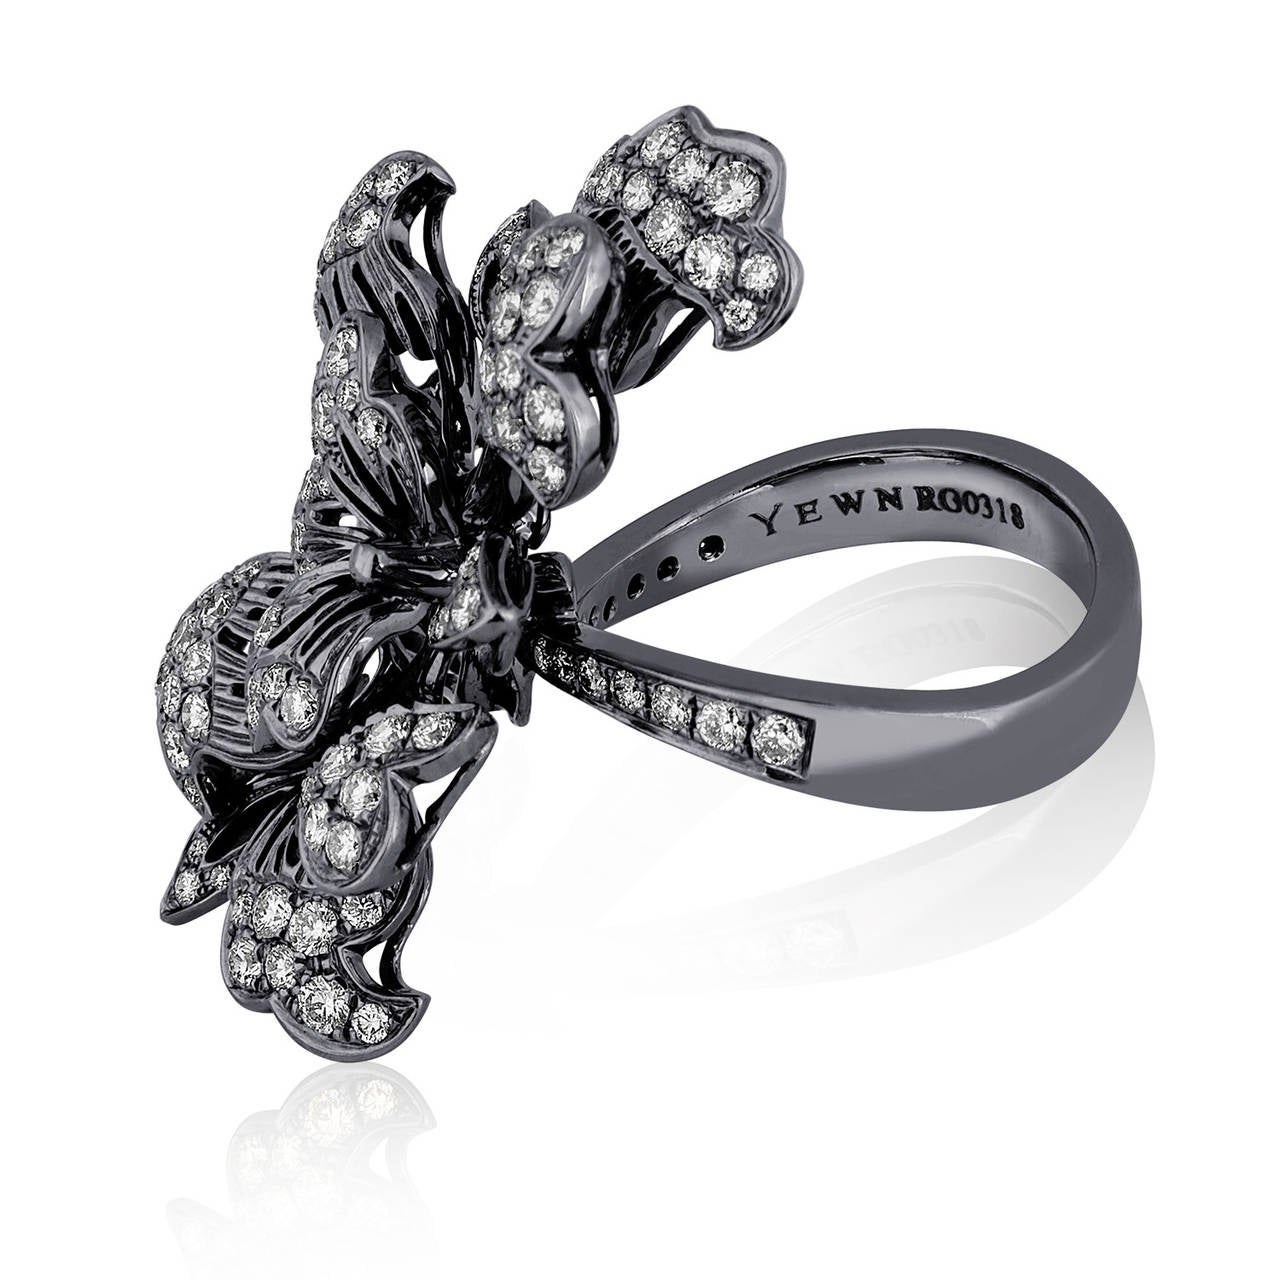 Dickson Yewn Nostalgia Collection.
The ring is 18K White Gold Black Rhodium Plated.
The ring has 2.50ct in F VS Diamonds.
The ring is a size 5.5, not sizable.
The ring weighs 12.3 grams.
It measures 1.25